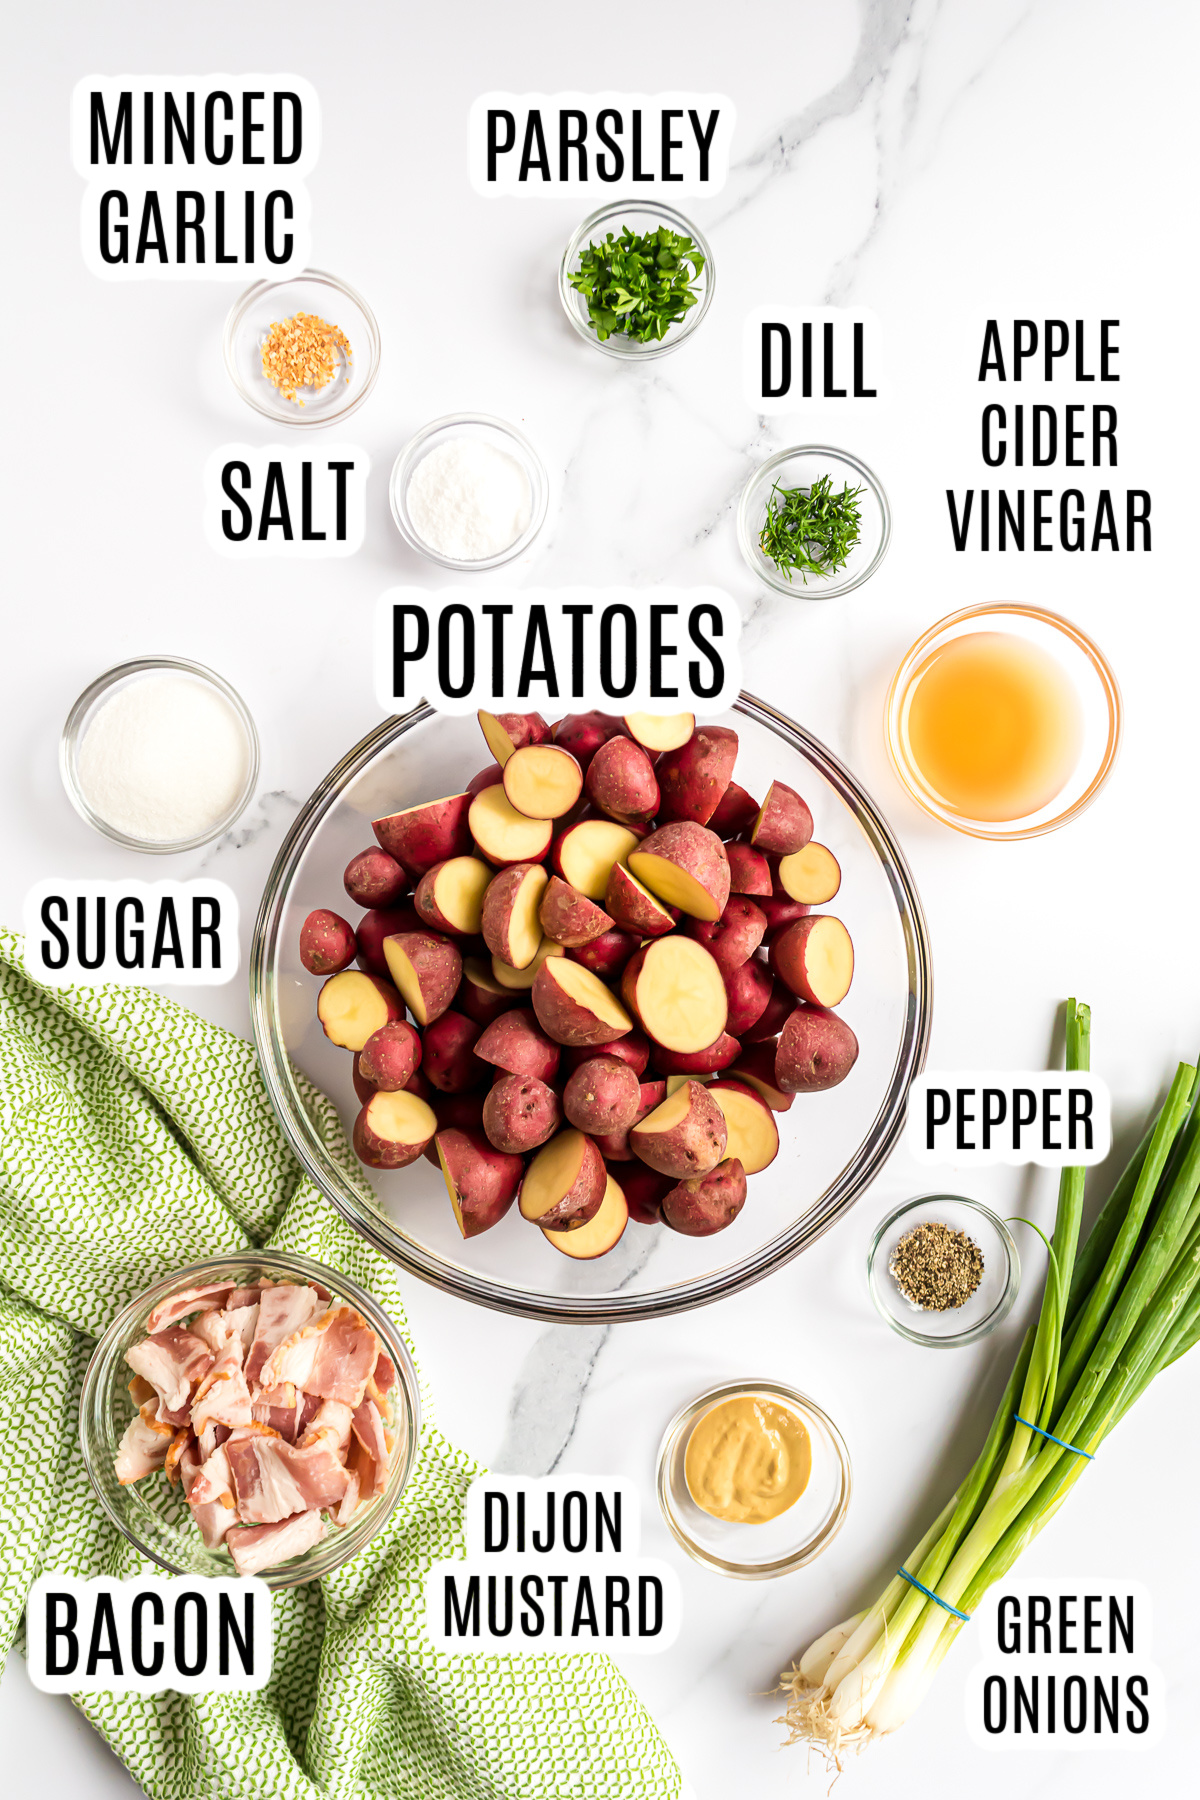 All the ingredients needed to make the dish, including baby red potatoes, minced garlic, parsley, salt, dill, apple cider vinegar, sugar, pepper, green onions, dijon mustard, and bacon.